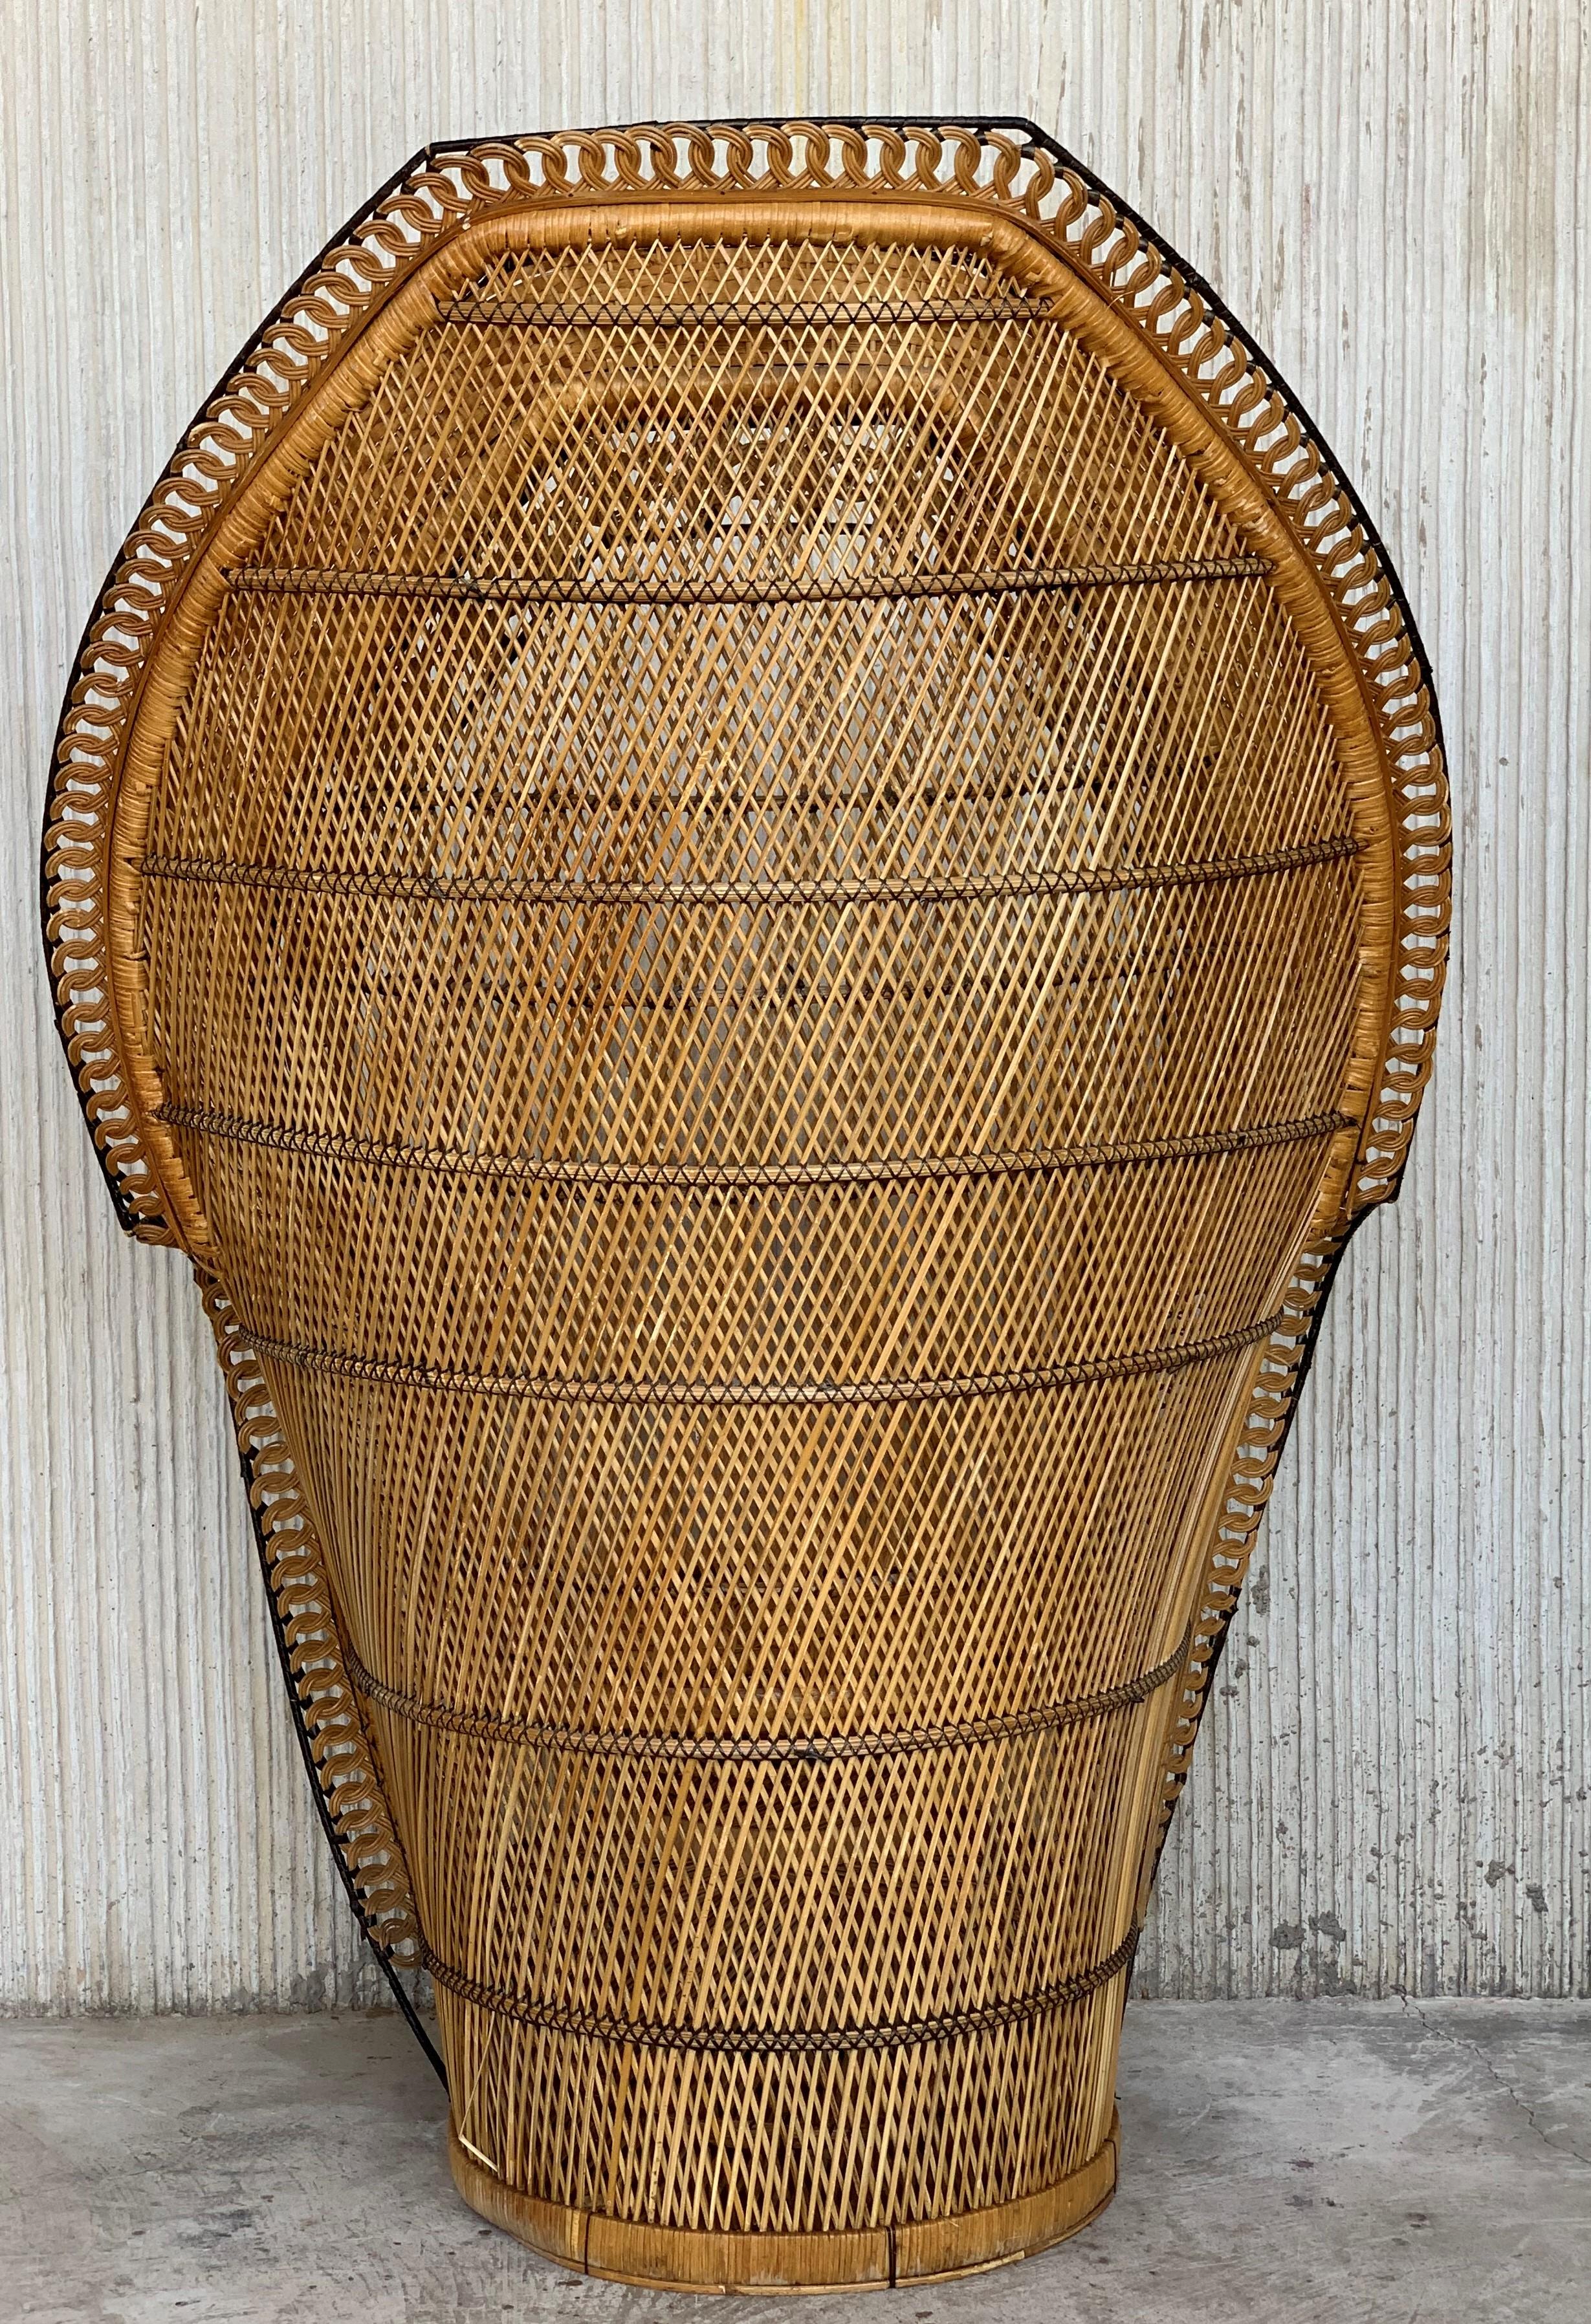 Vintage Handcrafted Wicker, Rattan and Reed Peacock Chair 1